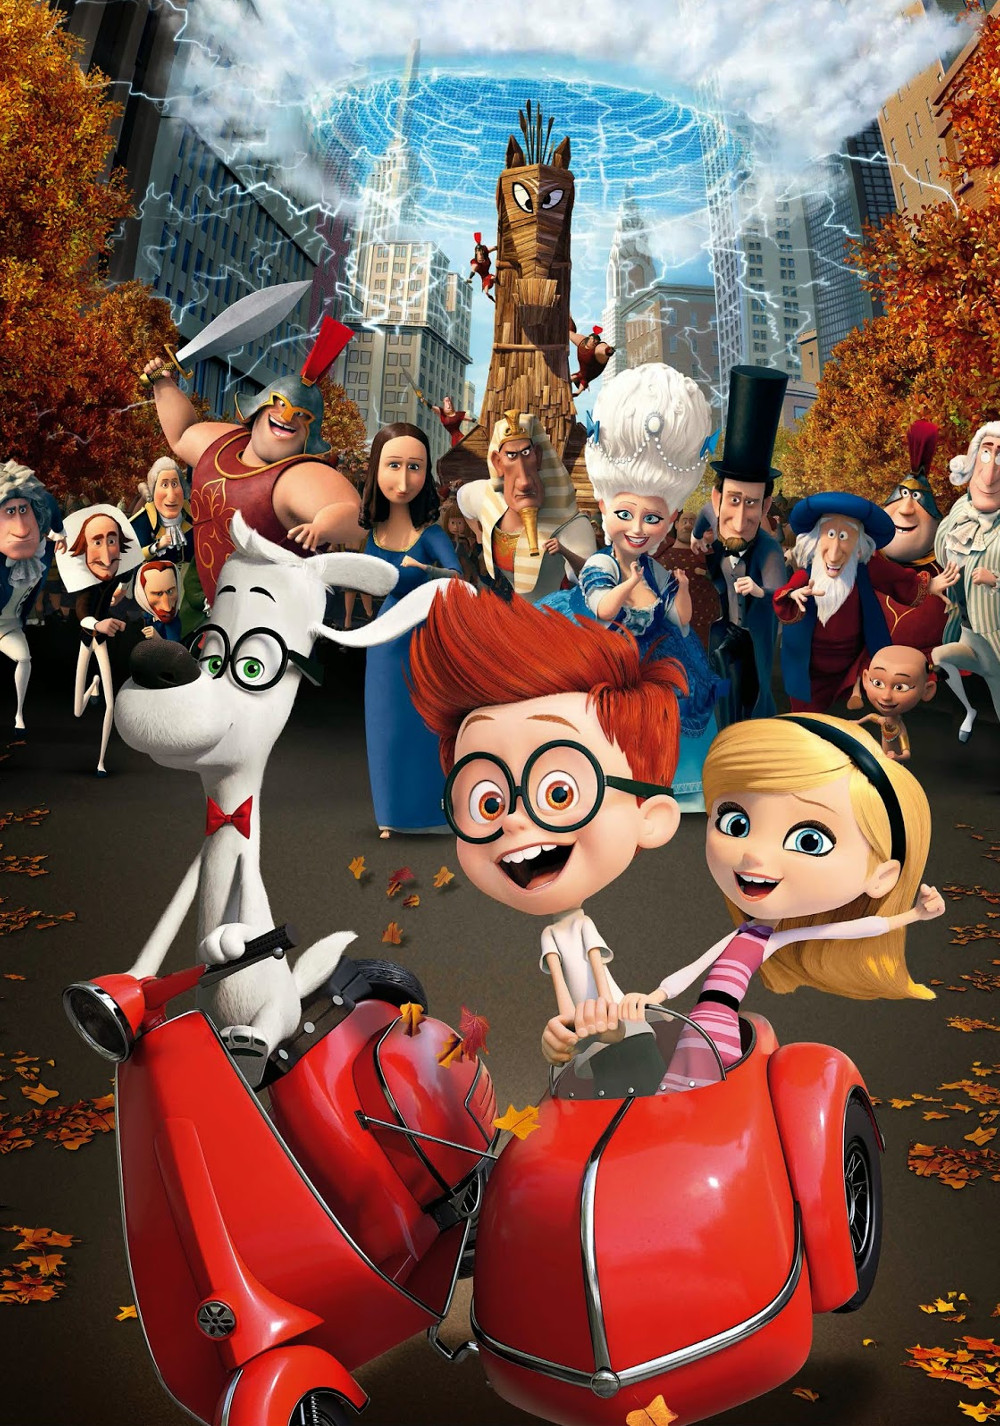 View, Download, Rate, and Comment on this Mr. Peabody & Sherman Mov...